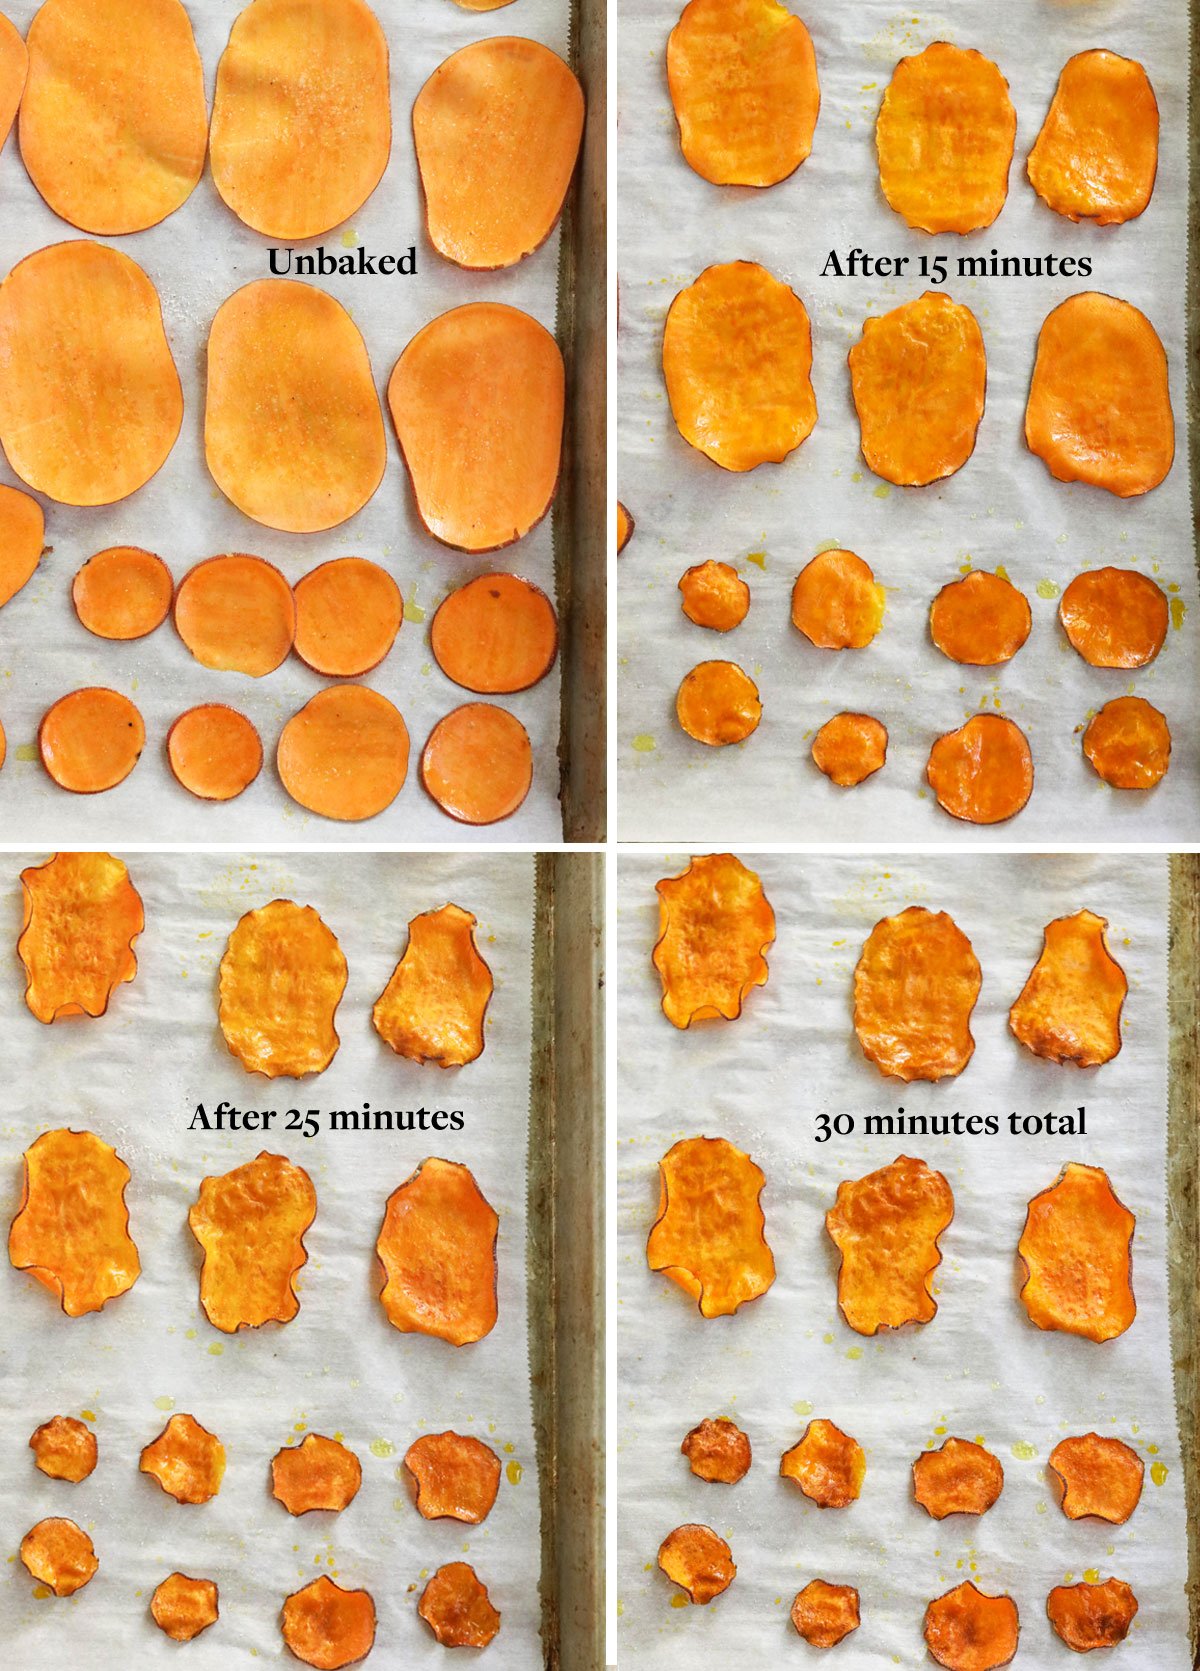 baked sweet potato chips at various stages during cooking